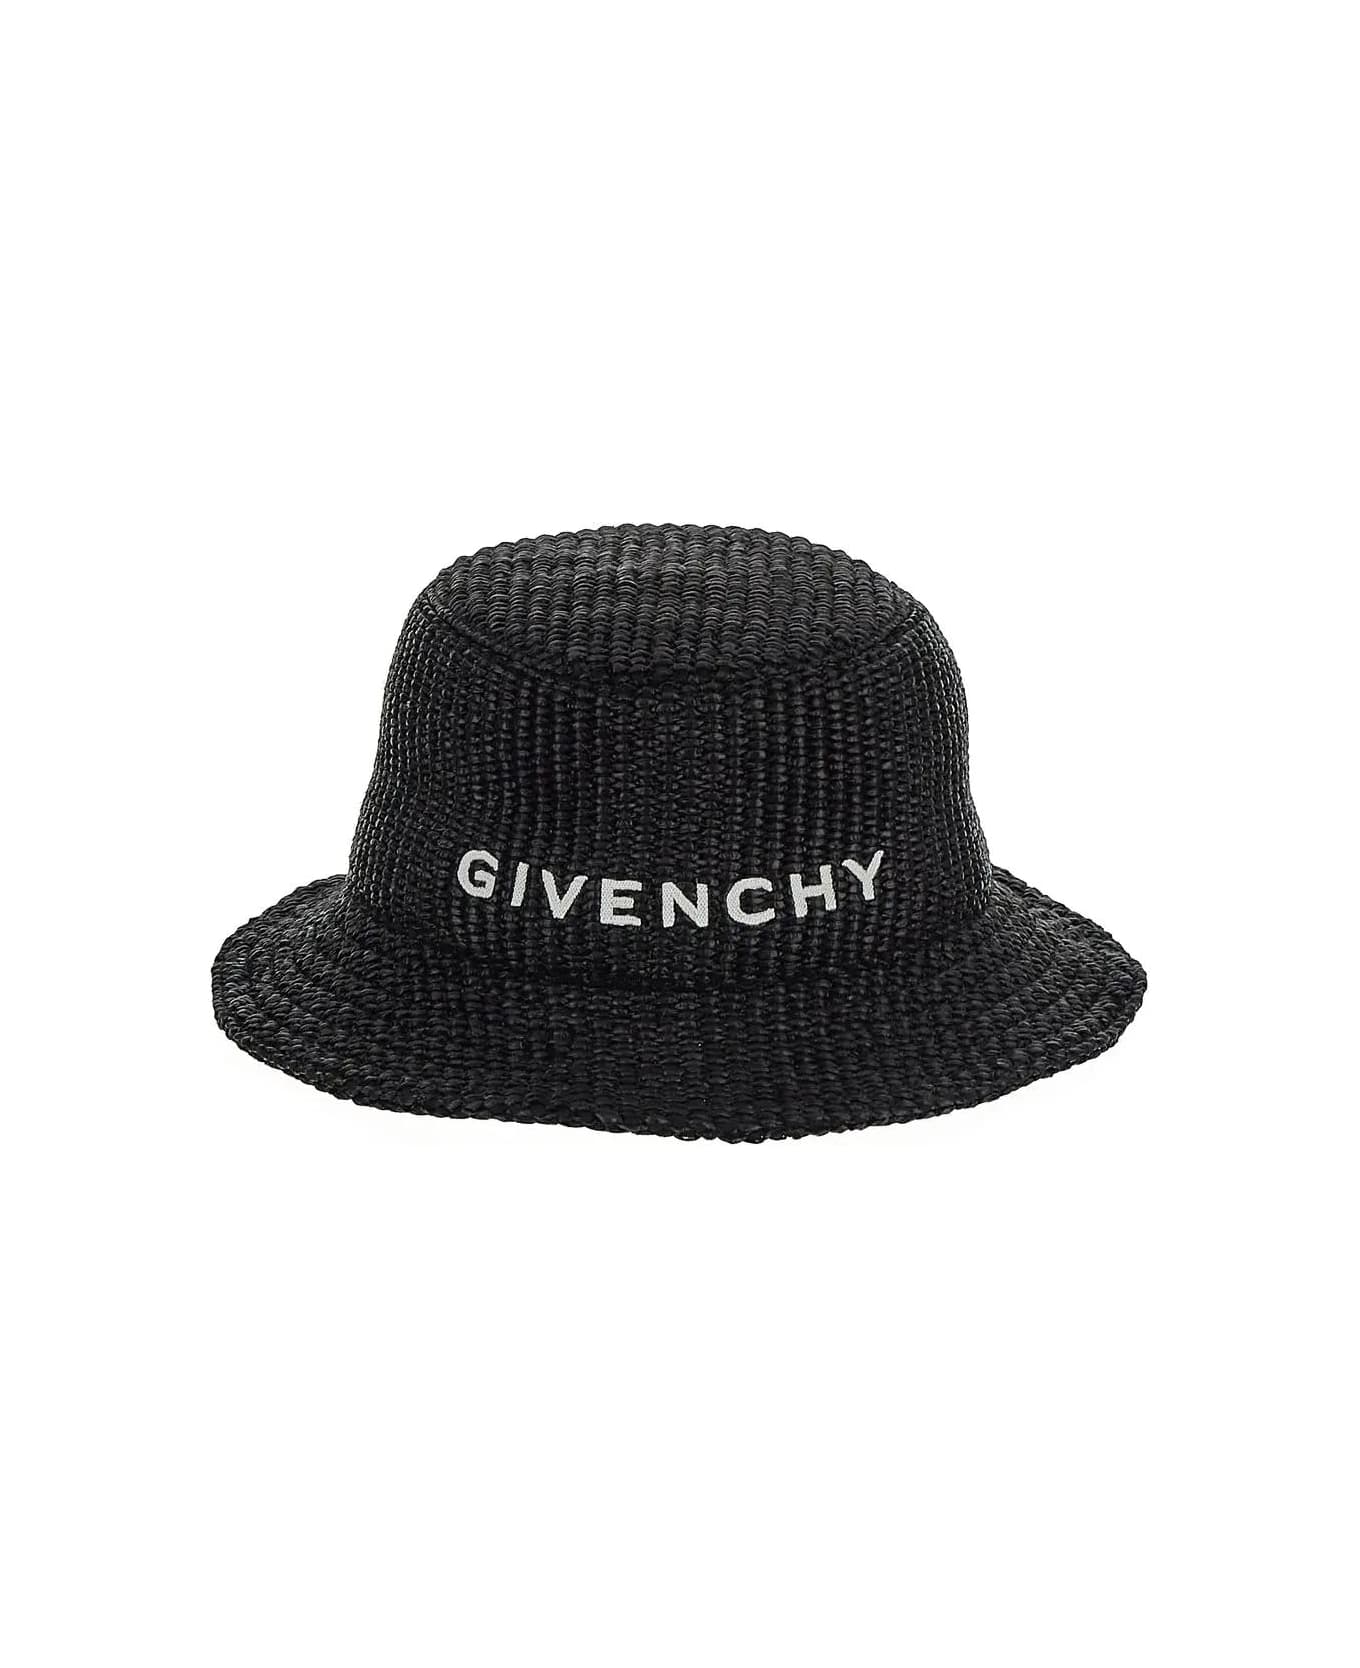 Givenchy Reversible Bucket shoe-care Hat - Black